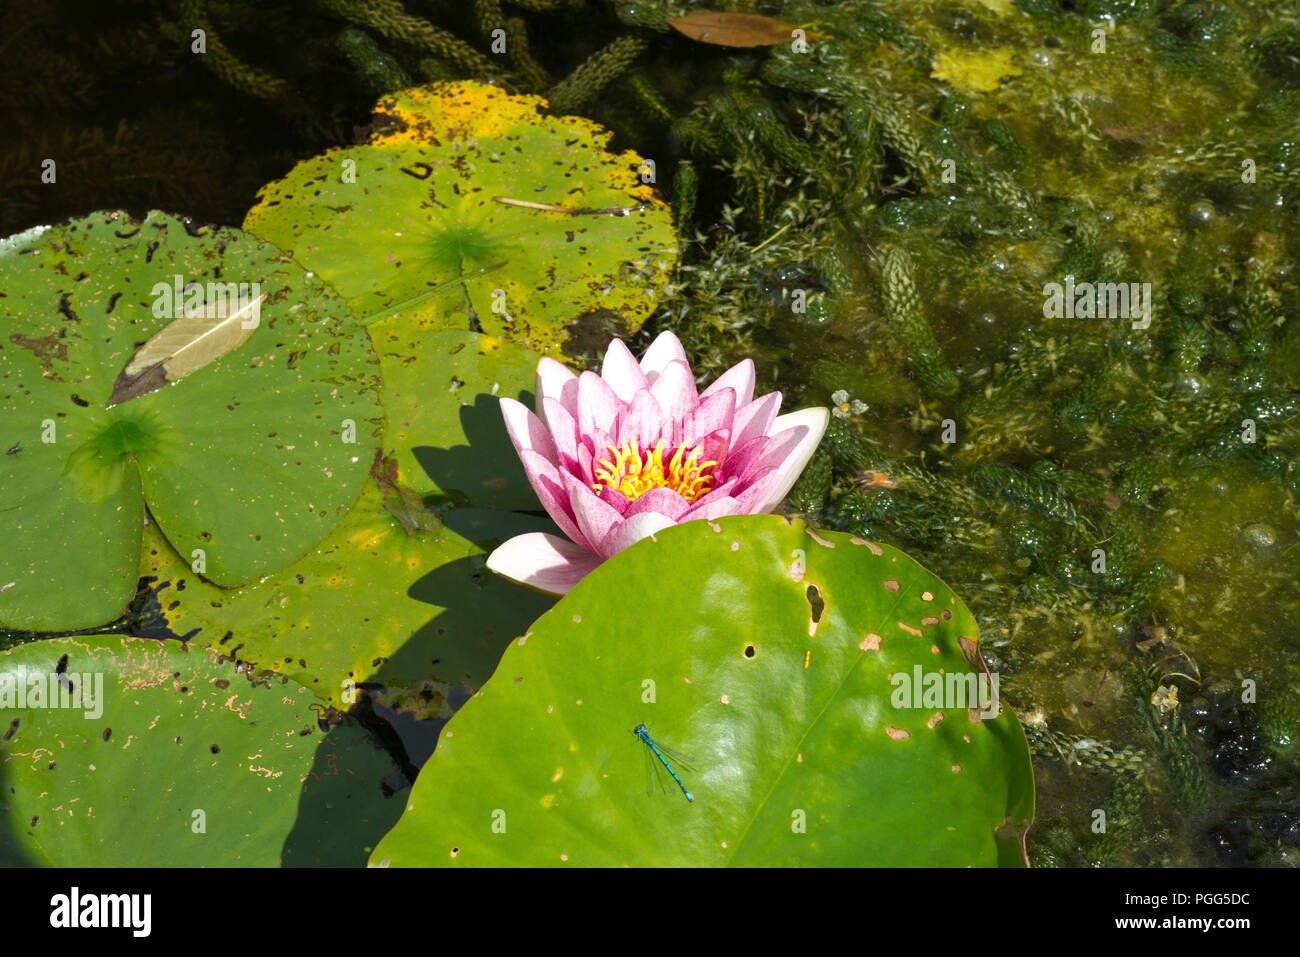 Pond life. A pink lily flower opens in the summer sunshine. A blue damsell nymph sits on a green lily pad. Stock Photo